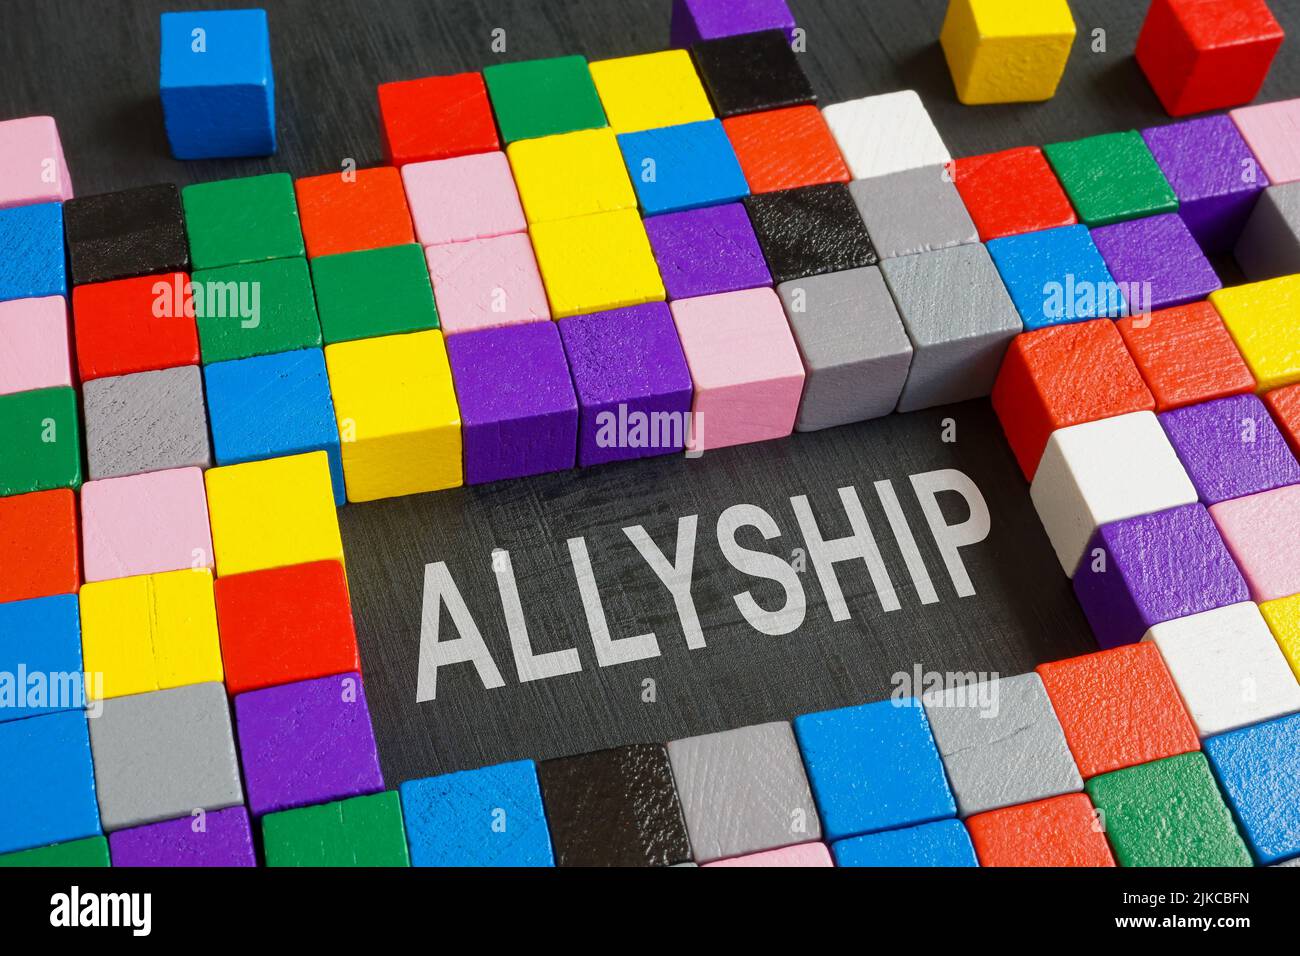 Word allyship and colorful cubes on the dark surface. Stock Photo